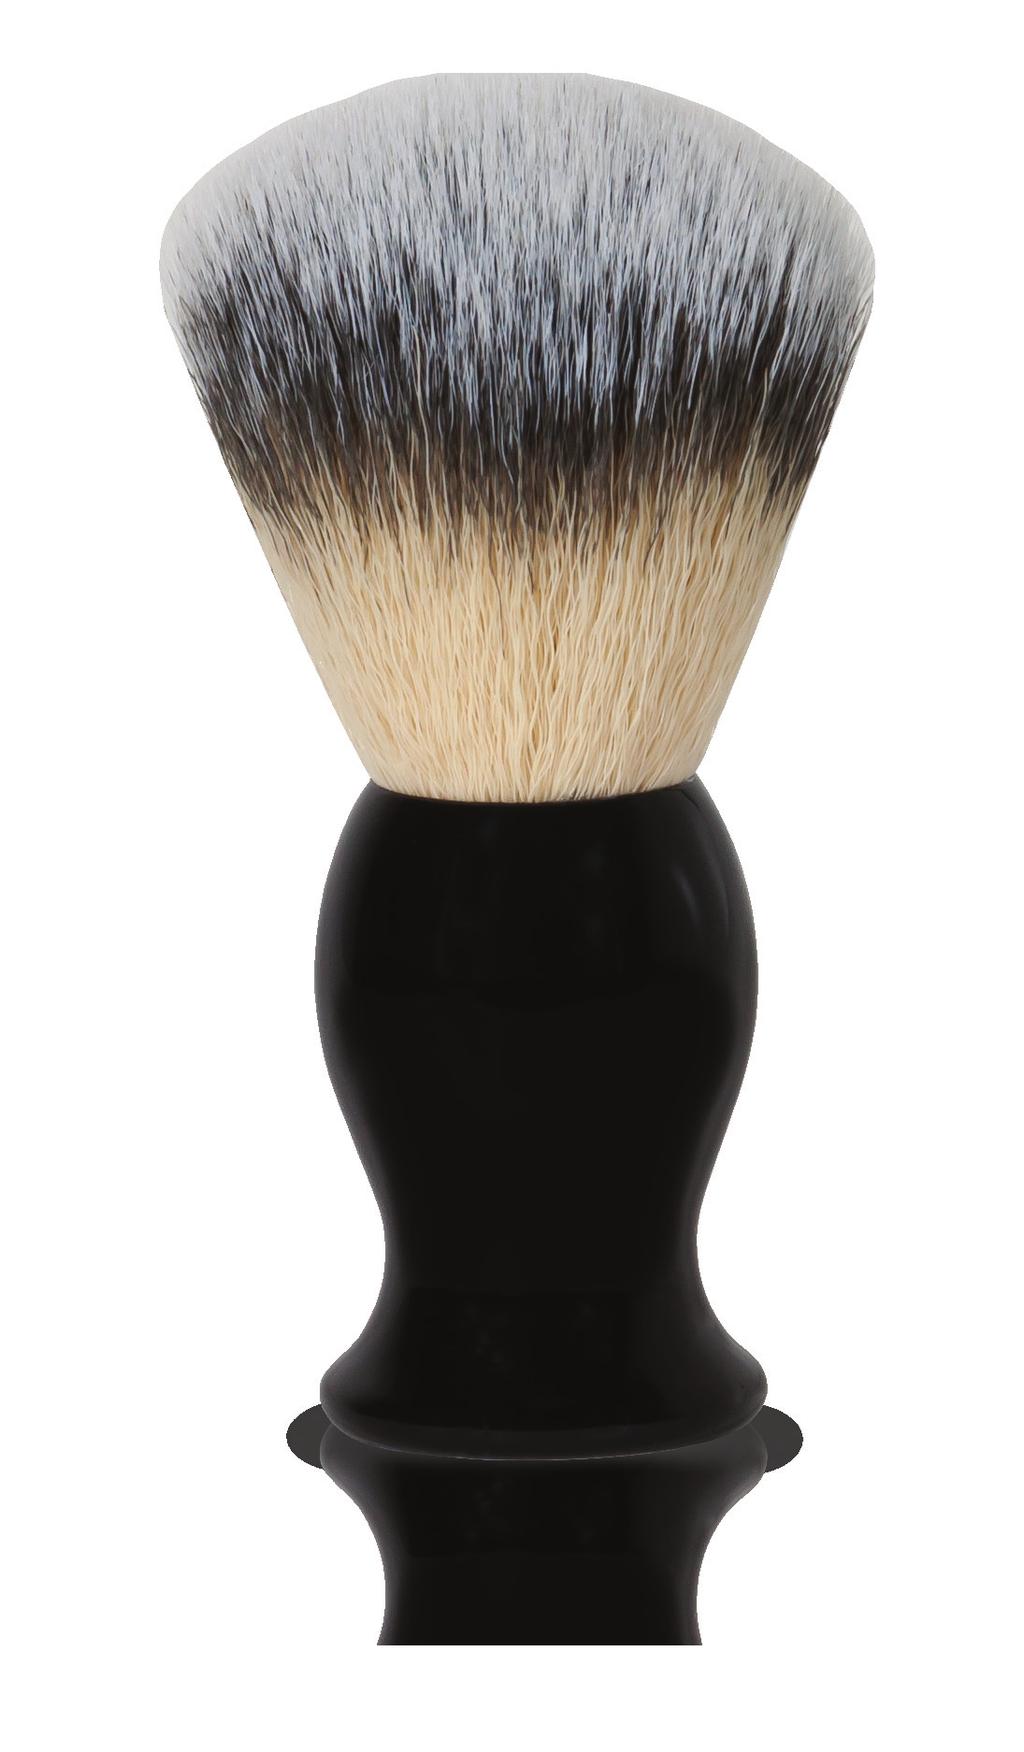 SHAVE BRUSH High grade synthetic hair shave brush. Provides the perfect balance of strength and softness to gently exfoliate dry skin while raising beard hairs for a barber close shave.